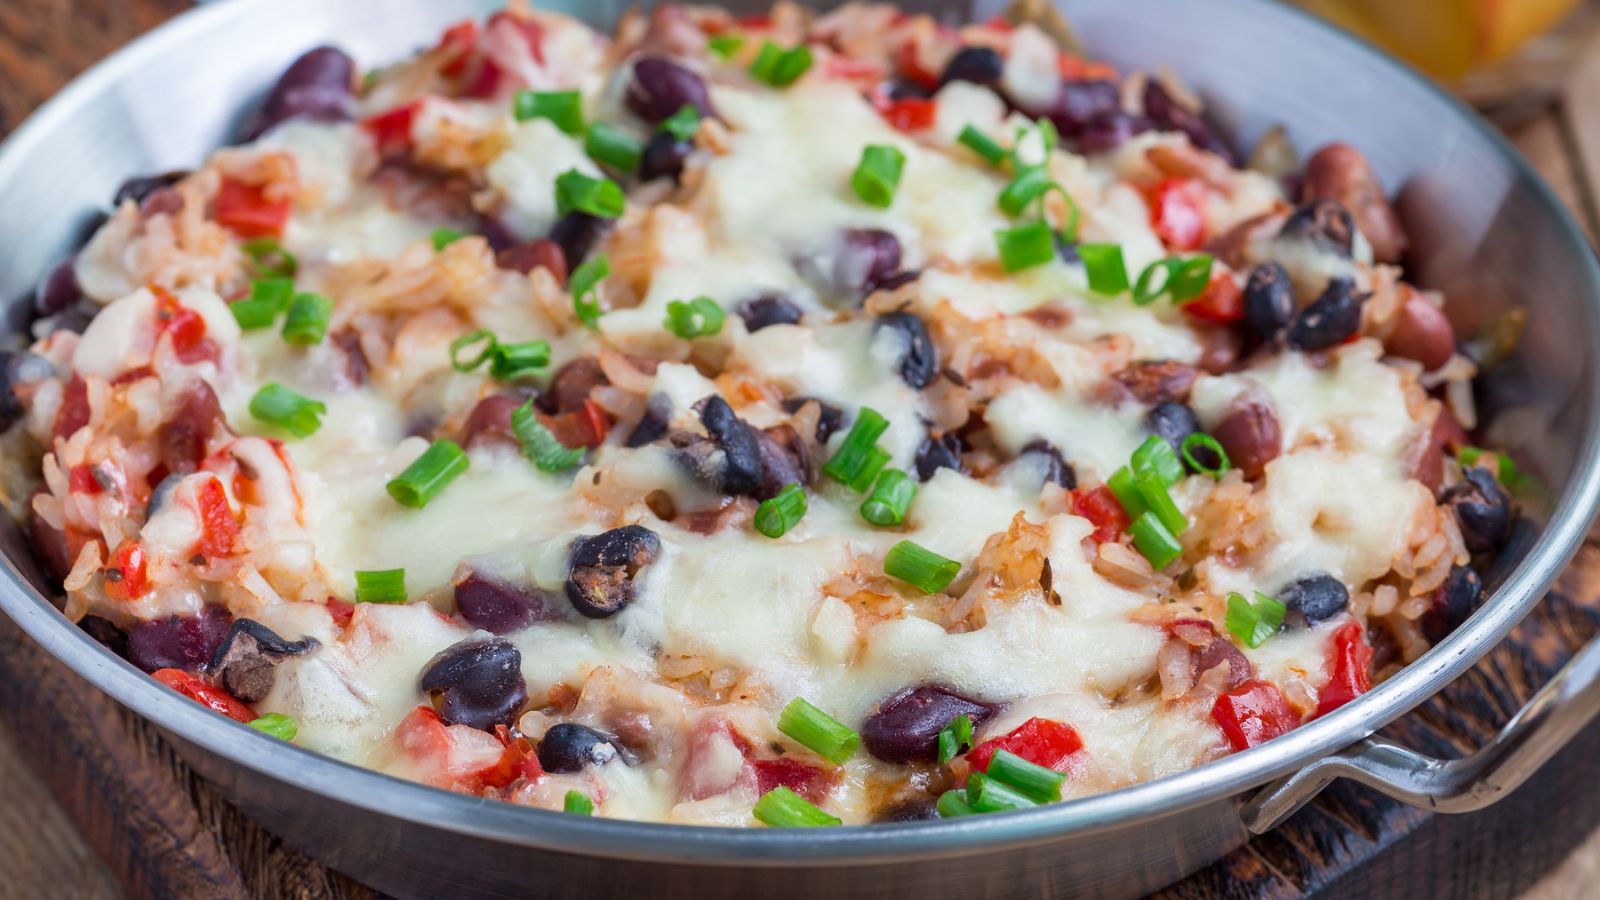 Warm Your Winter with 18 Easy Casserole Dishes